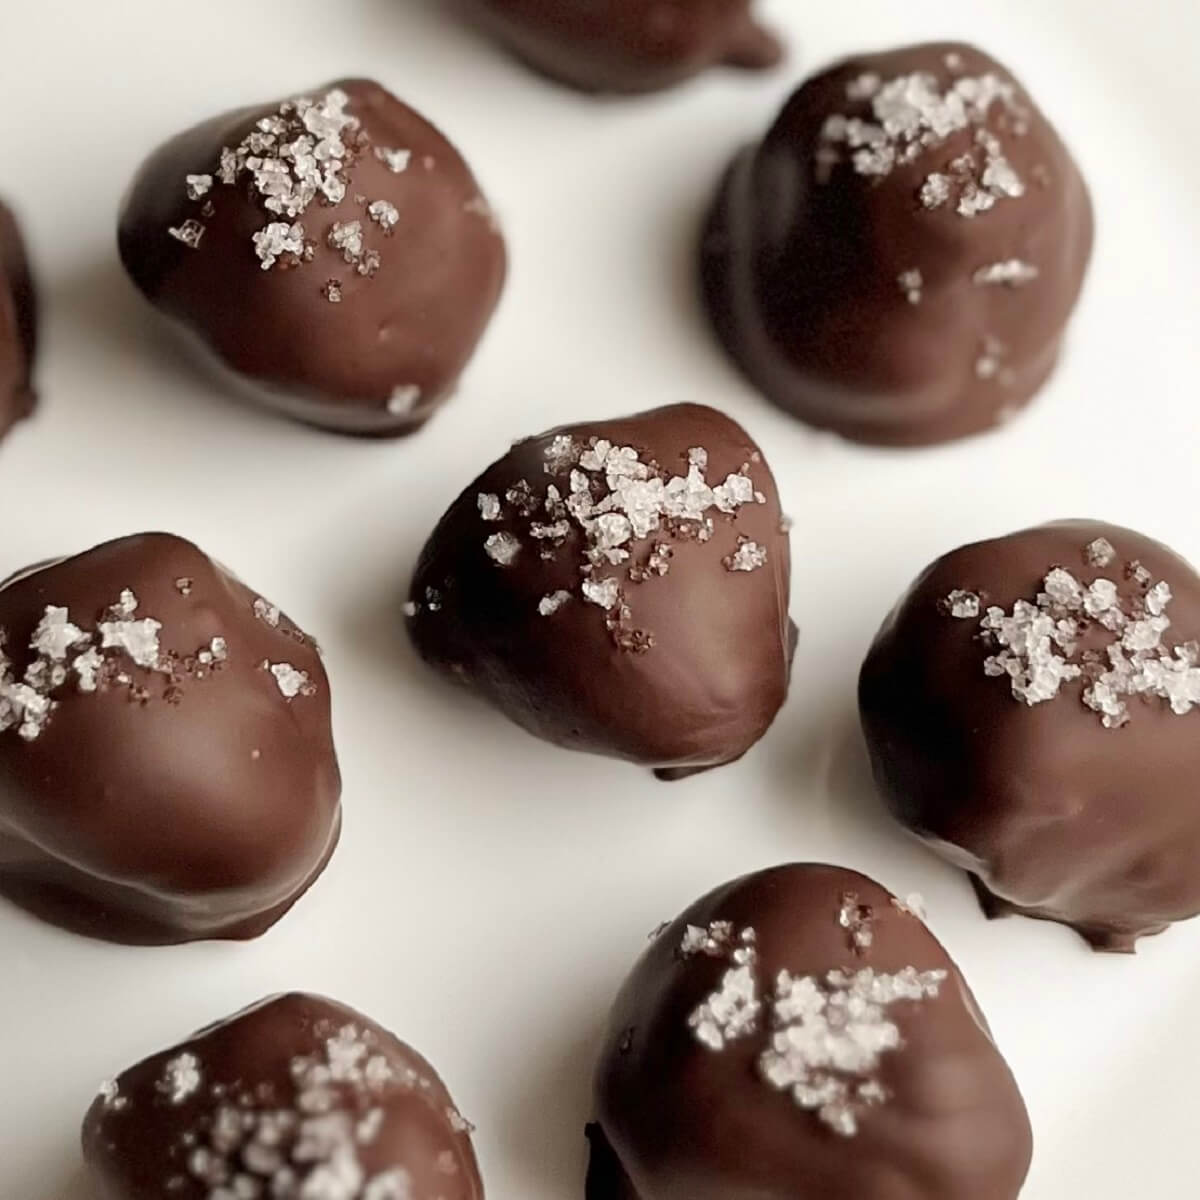 Olive oil chocolates sprinkled with sea salt on a white plate.